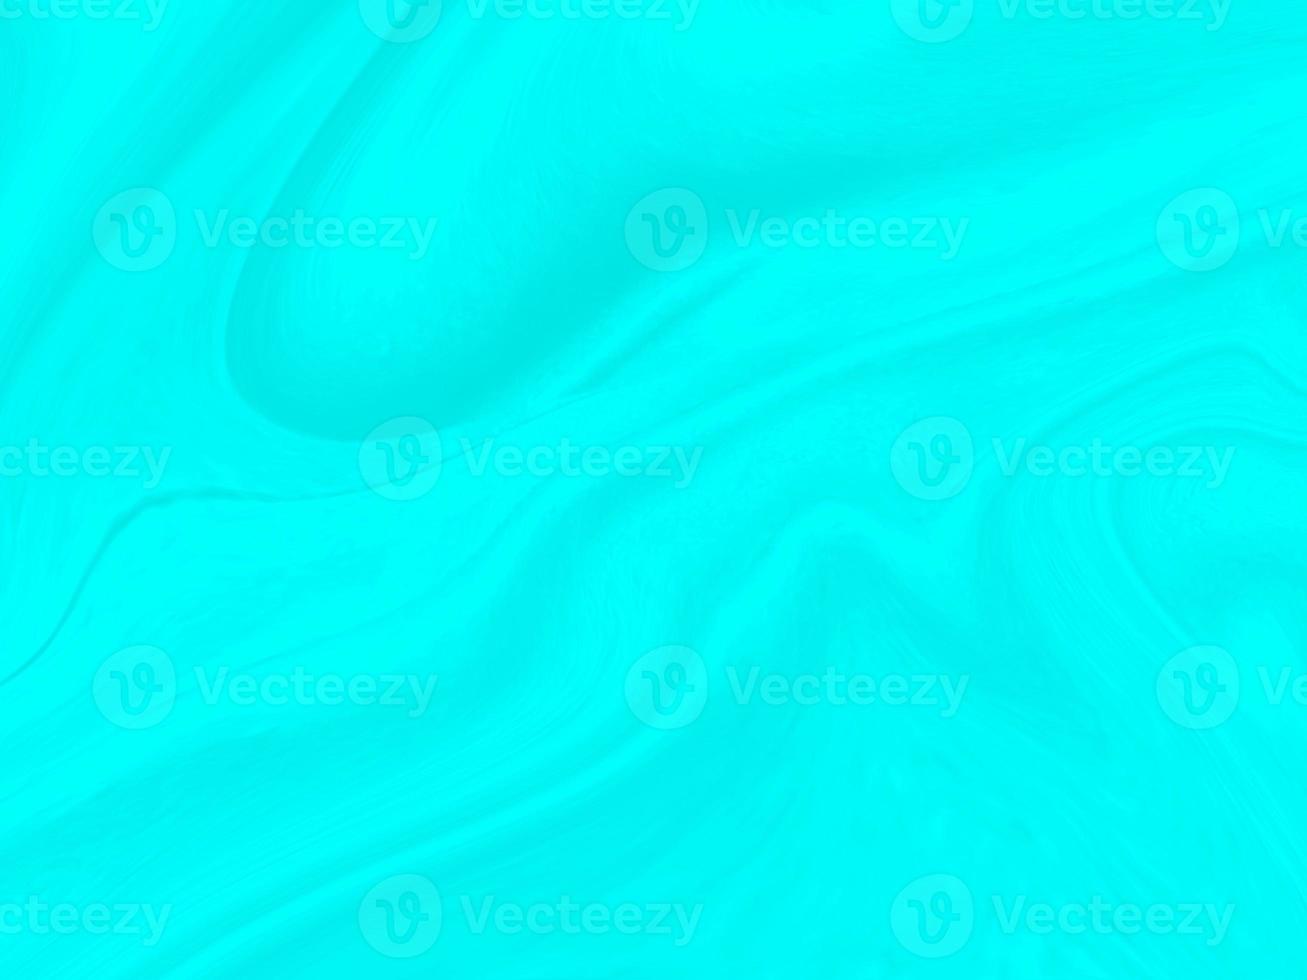 beauty sweet bright gradient blurred blue turquoise colorful image background. abstract fantasy growing liquid light photo